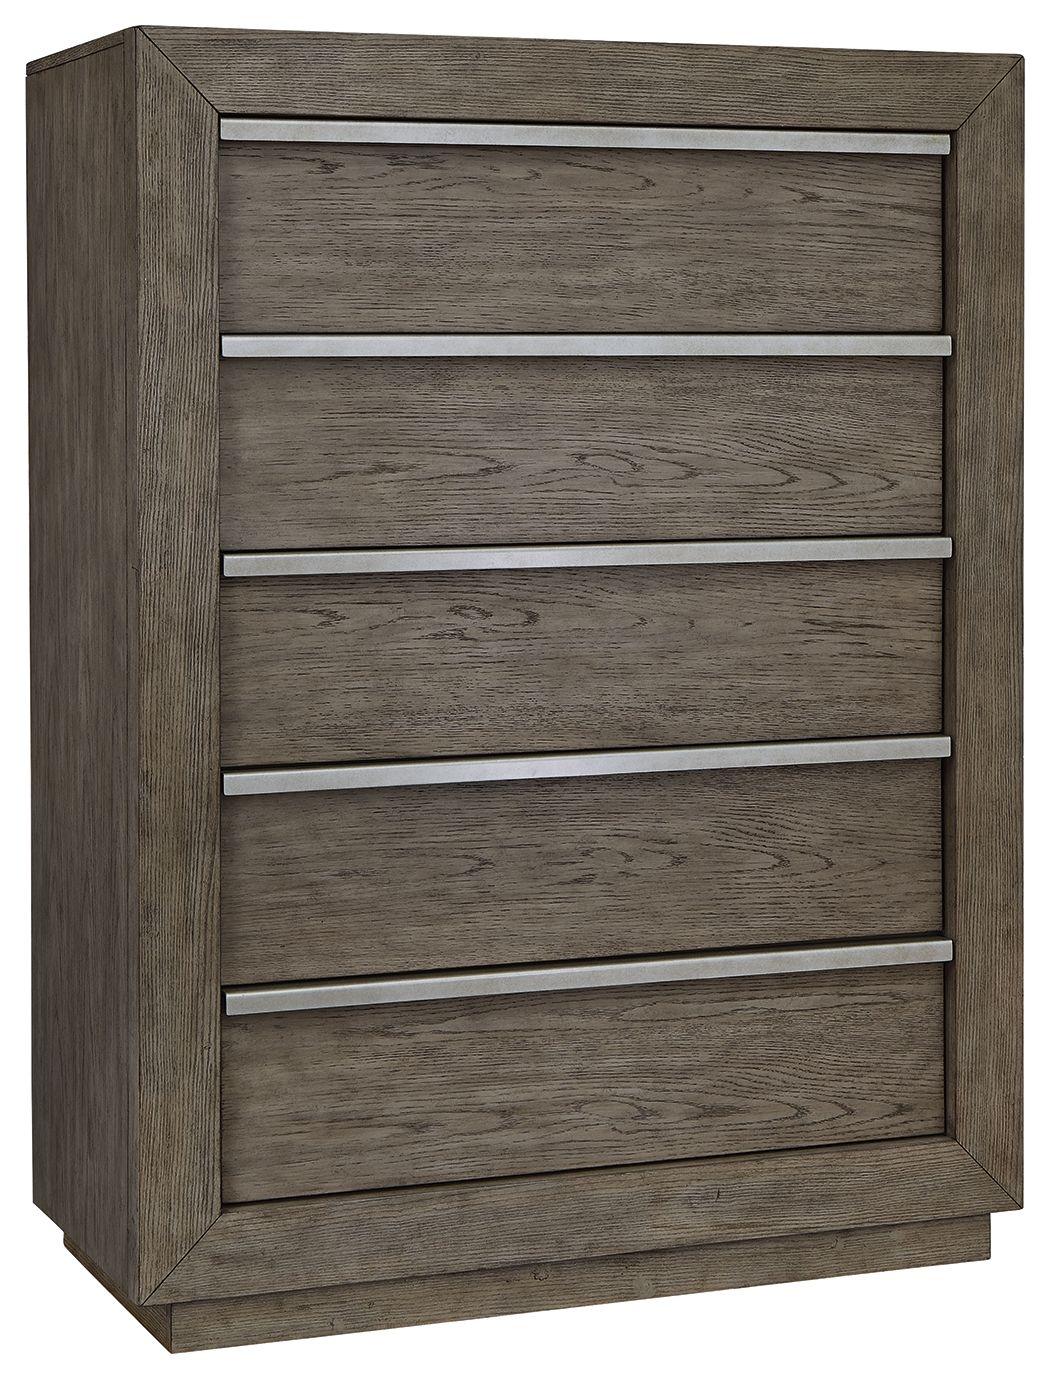 Benchcraft® - Anibecca - Weathered Gray - Five Drawer Chest - 5th Avenue Furniture